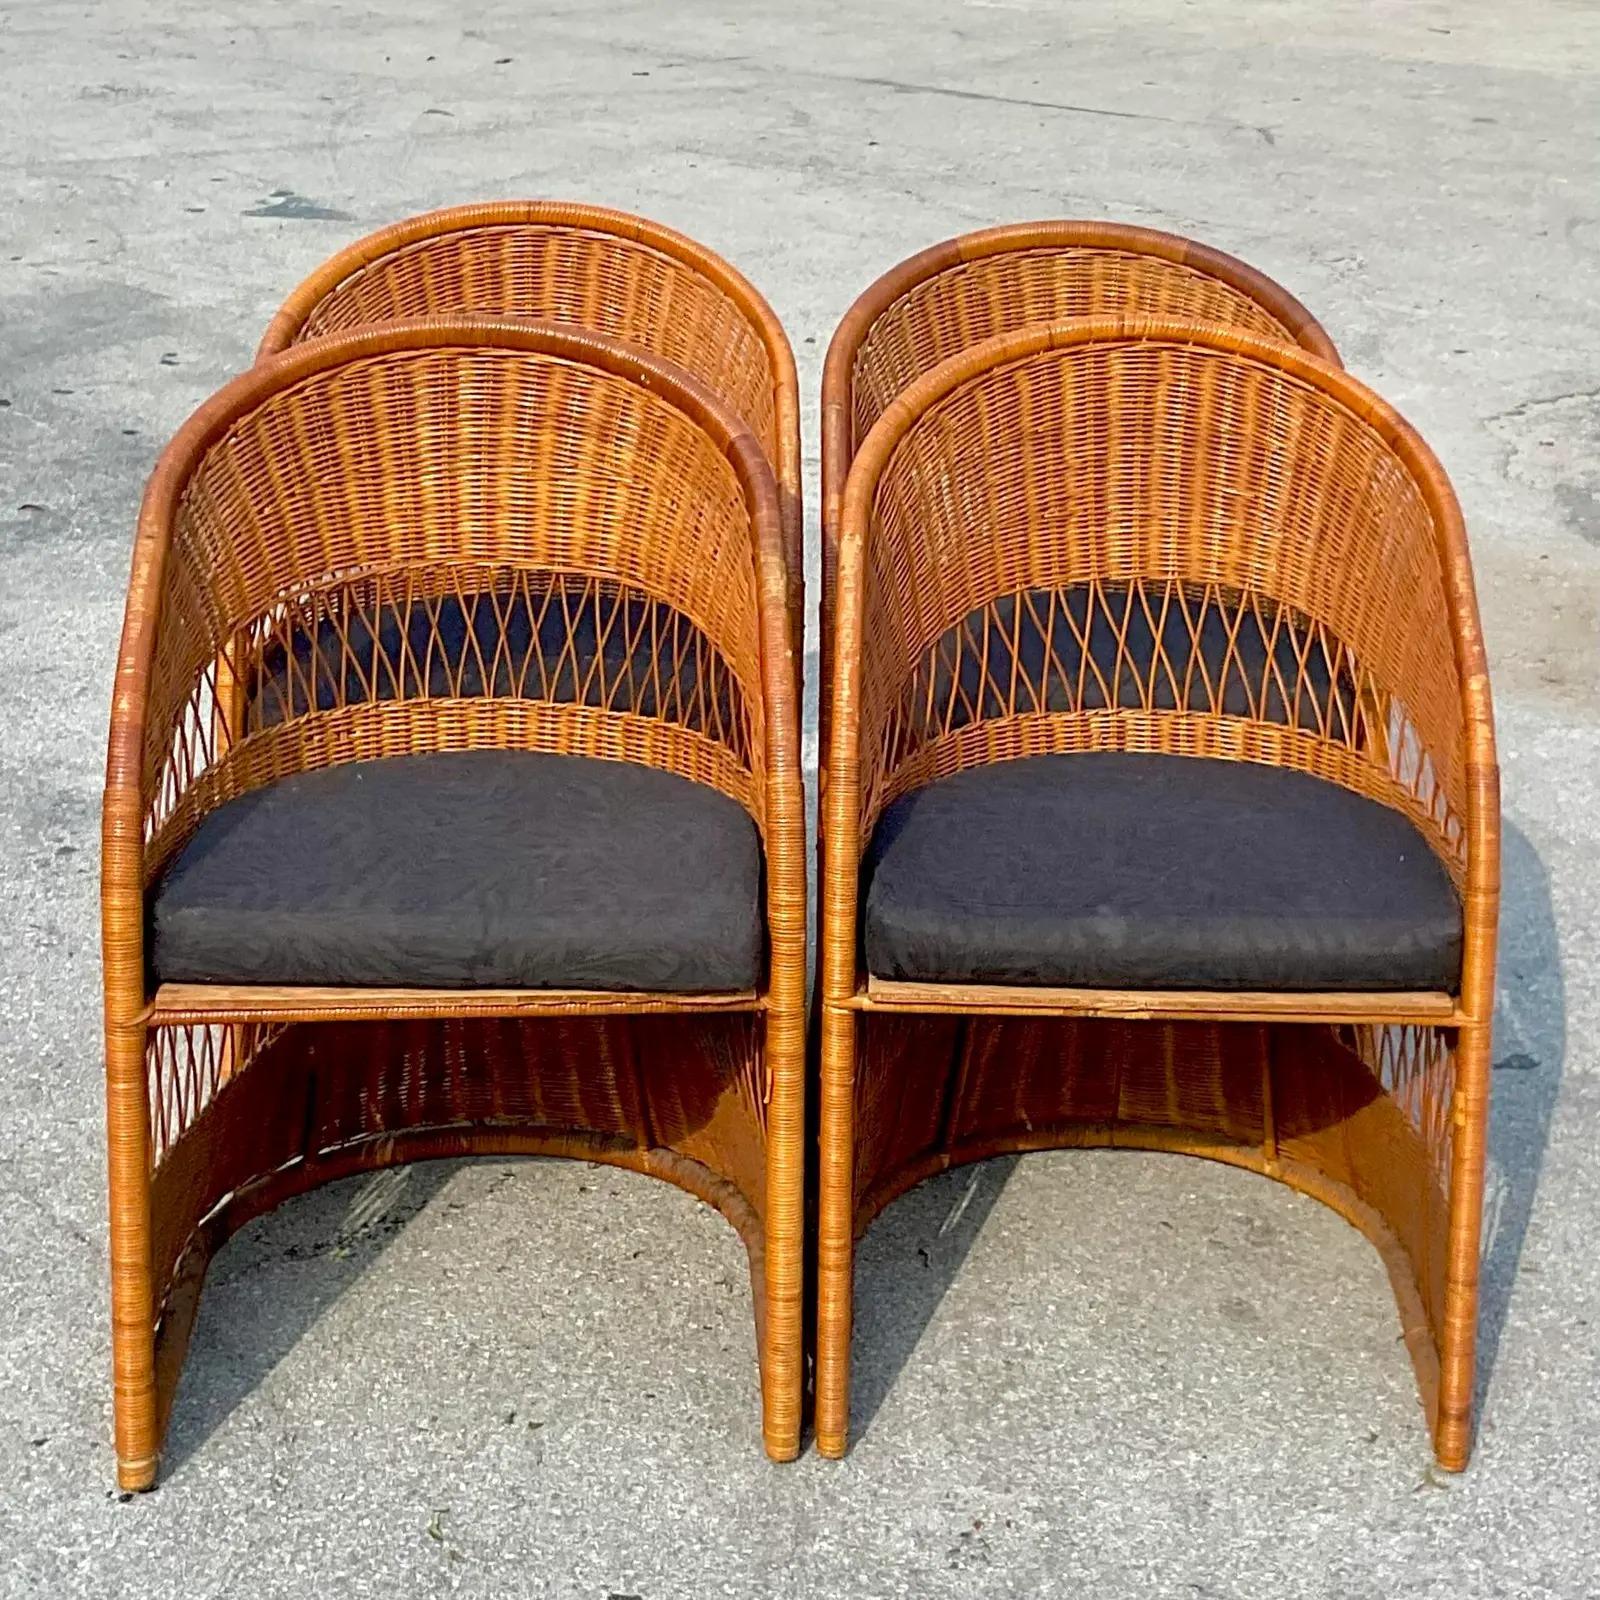 A fabulous set of four vintage Coastal dining chairs. Chic woven rattan chairs in a sexy tub shape. Open areas in the weave to let light pass through. Acquired from a Palm Beach estate.